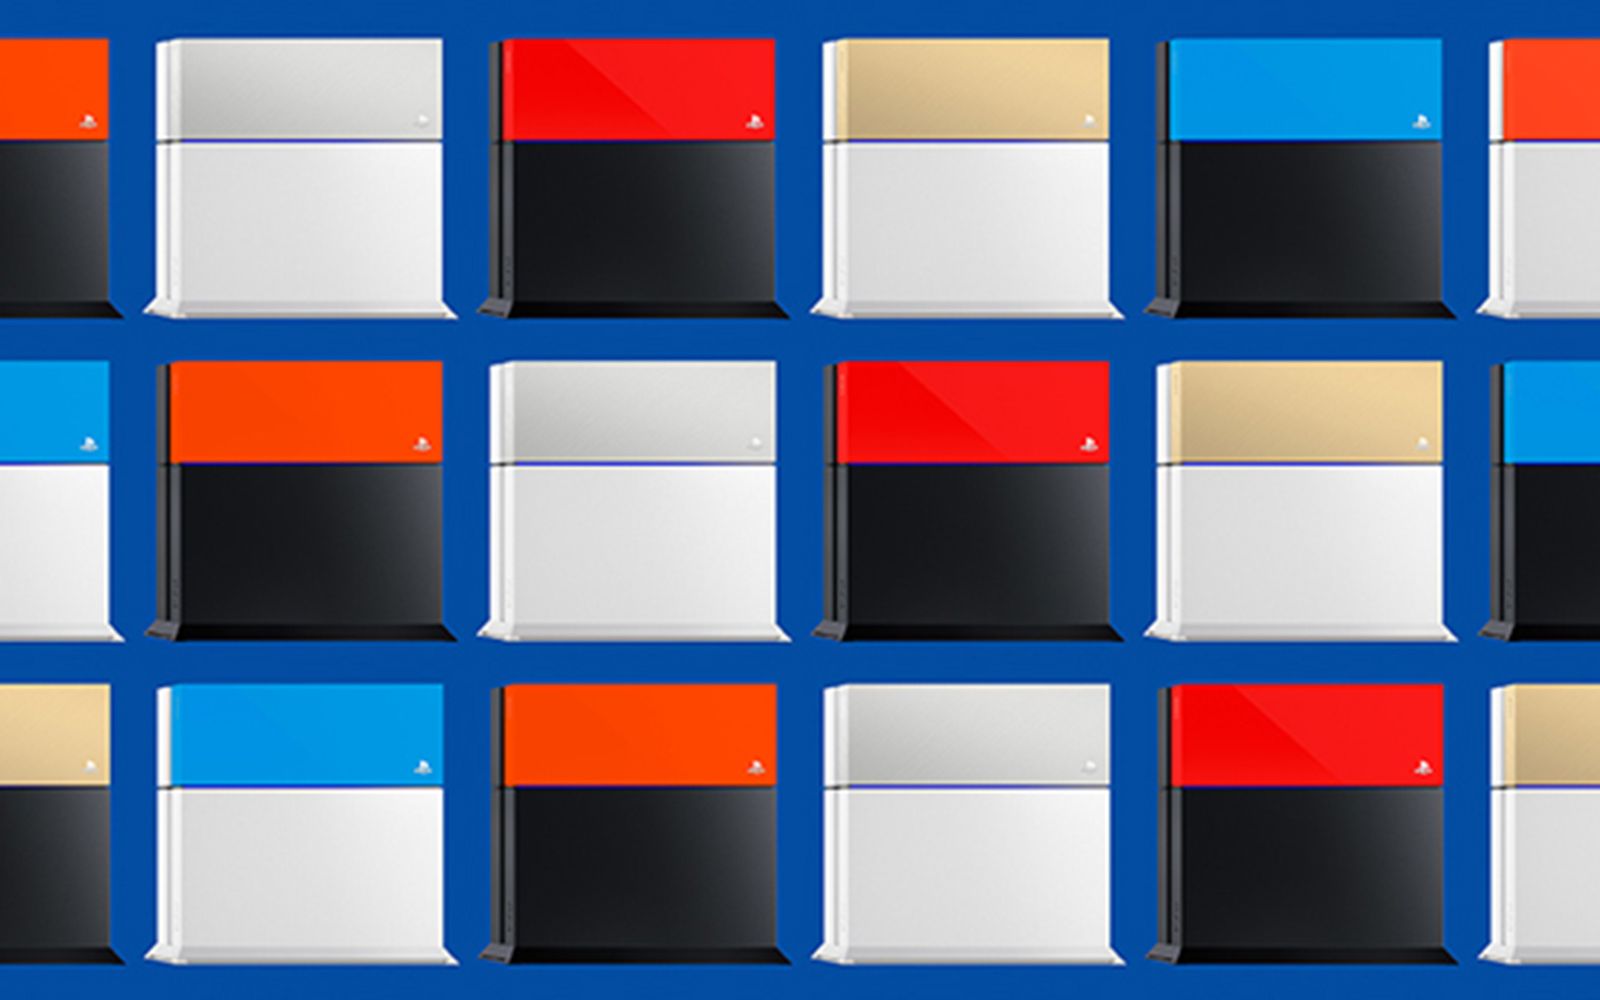 sony ps4 to get colour faceplates on 18 november here are the personalisation options image 1